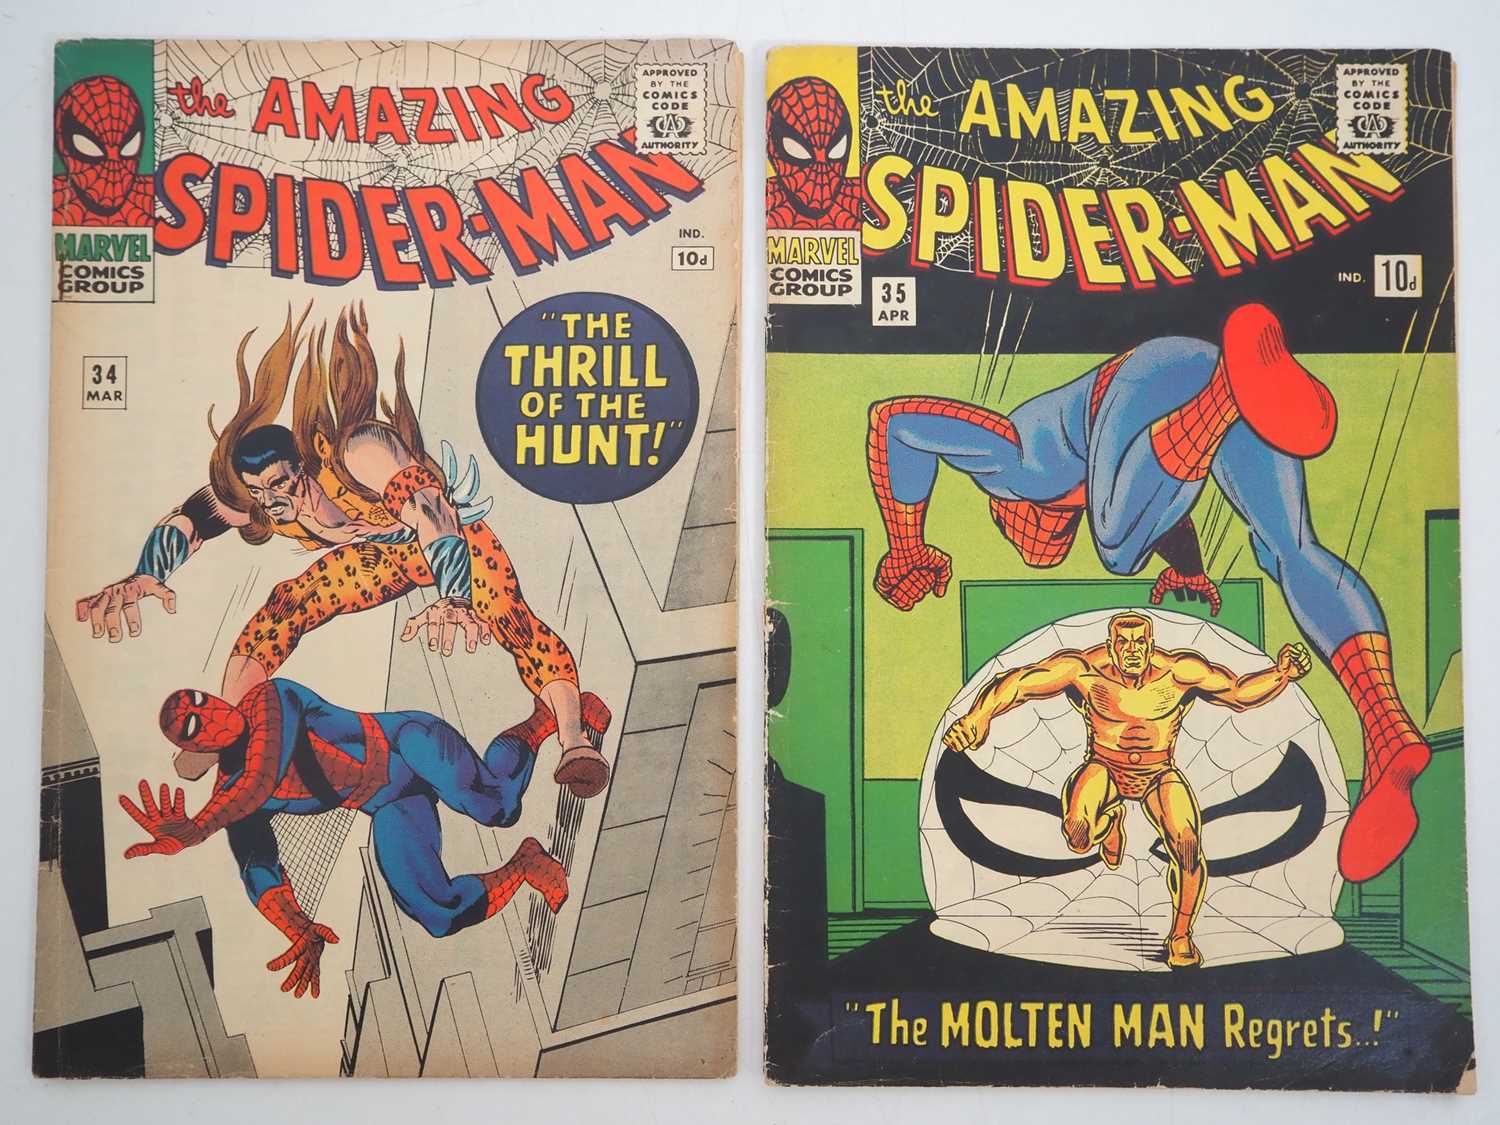 AMAZING SPIDER-MAN #34 & 35 (2 in Lot) - (1966 - MARVEL - UK Price Variant) - Includes the second